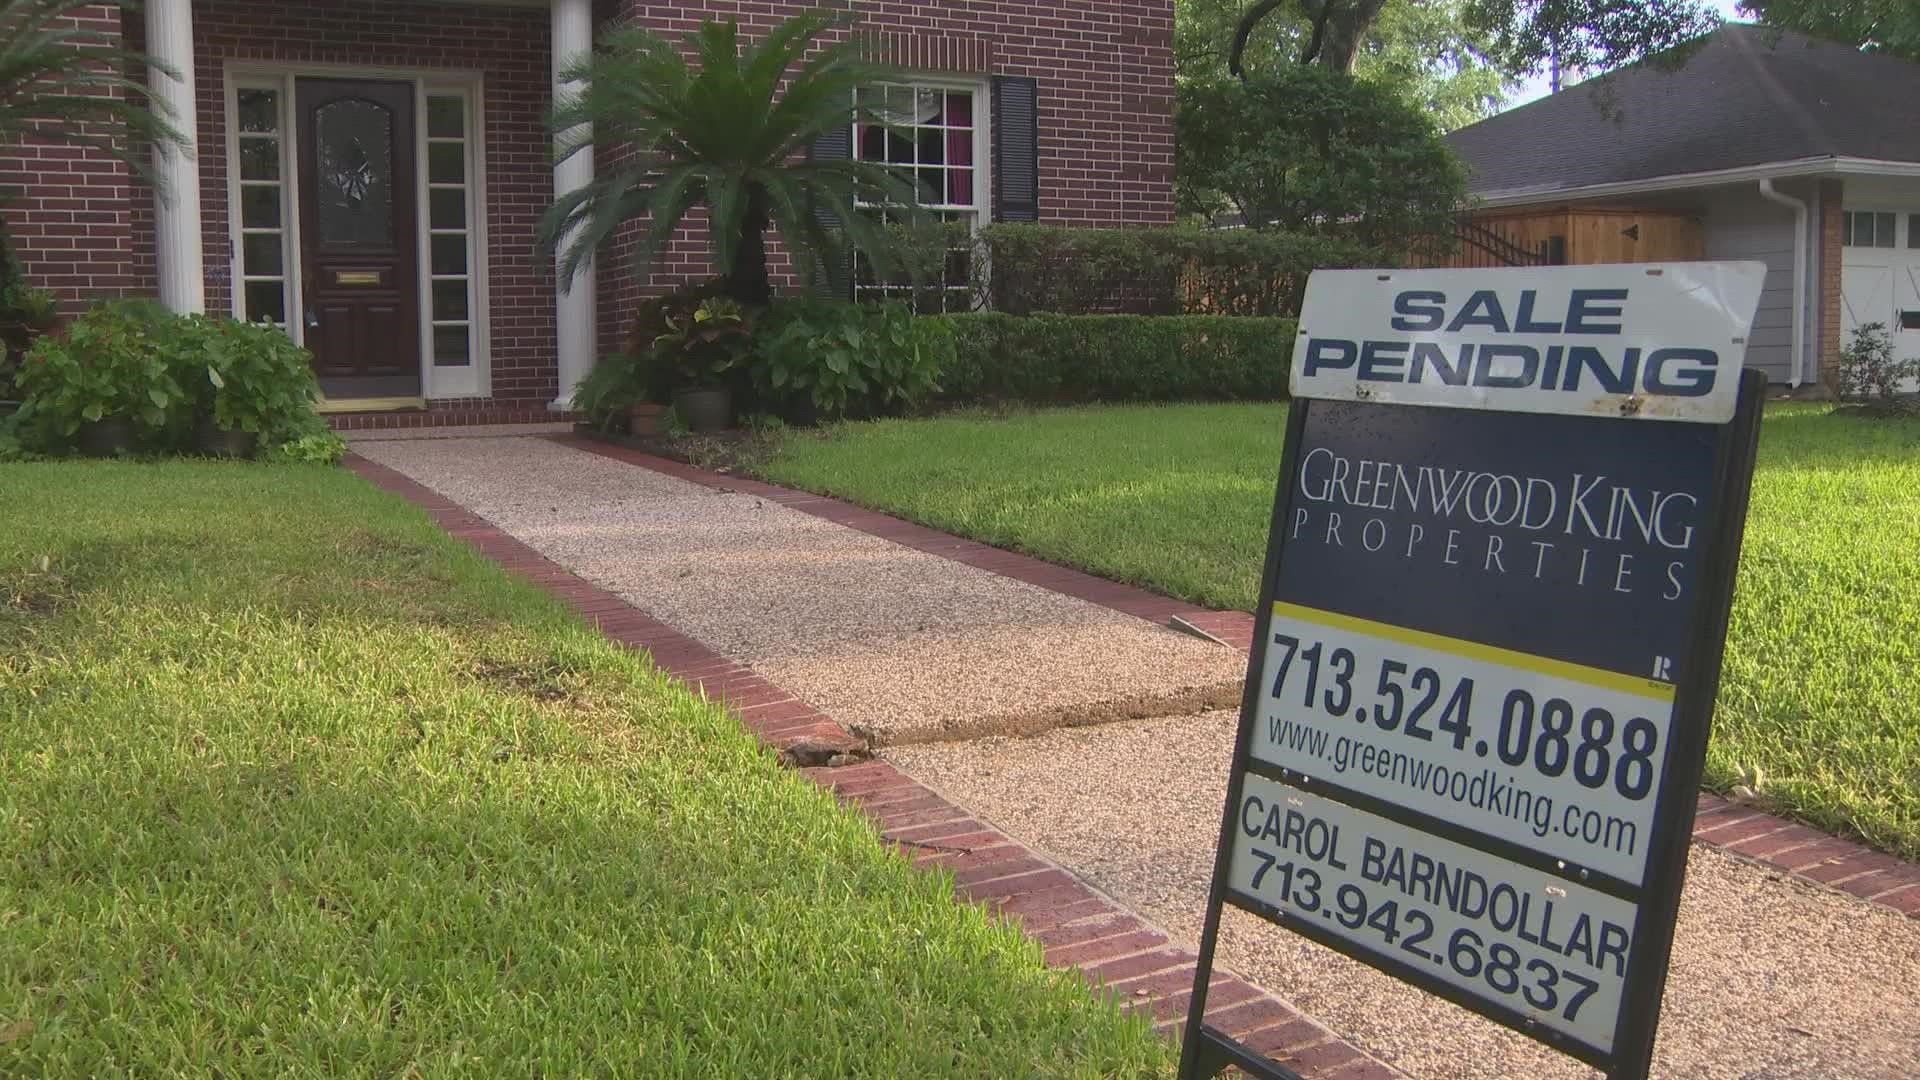 Experts said it's still a seller's market in Houston, but it's not quite as hot as it was a year ago.